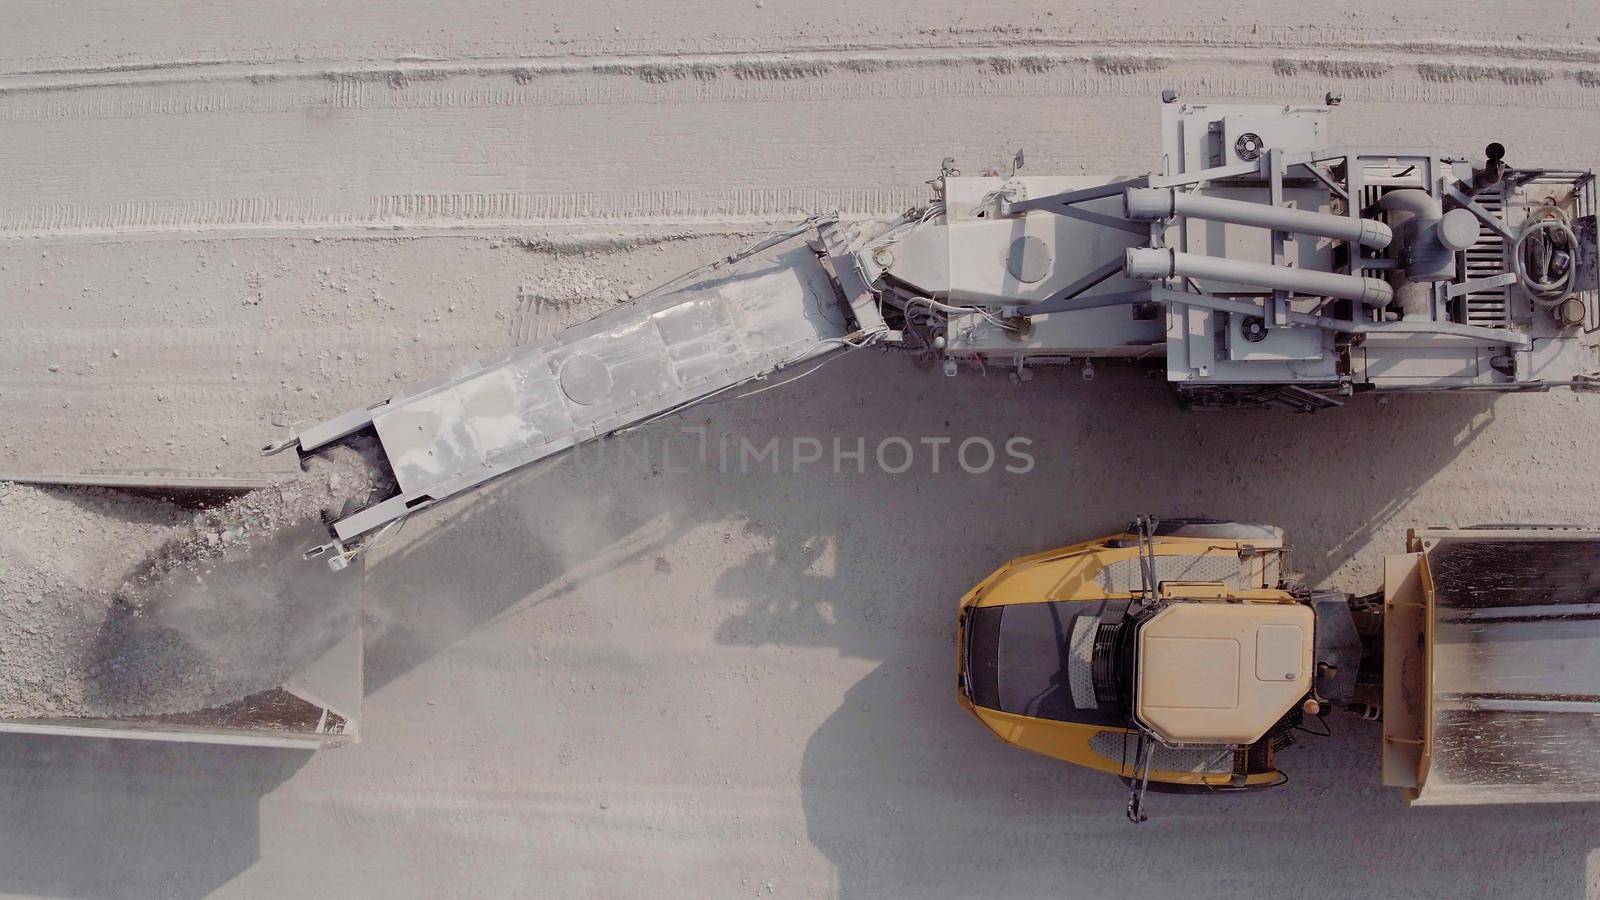 Large excavator in a lignite coal mine. Loading coal into truck. Mining car machinery to transport coal. Open pit mine quarrying extractive industry stripping work. Big Yellow Mining Trucks